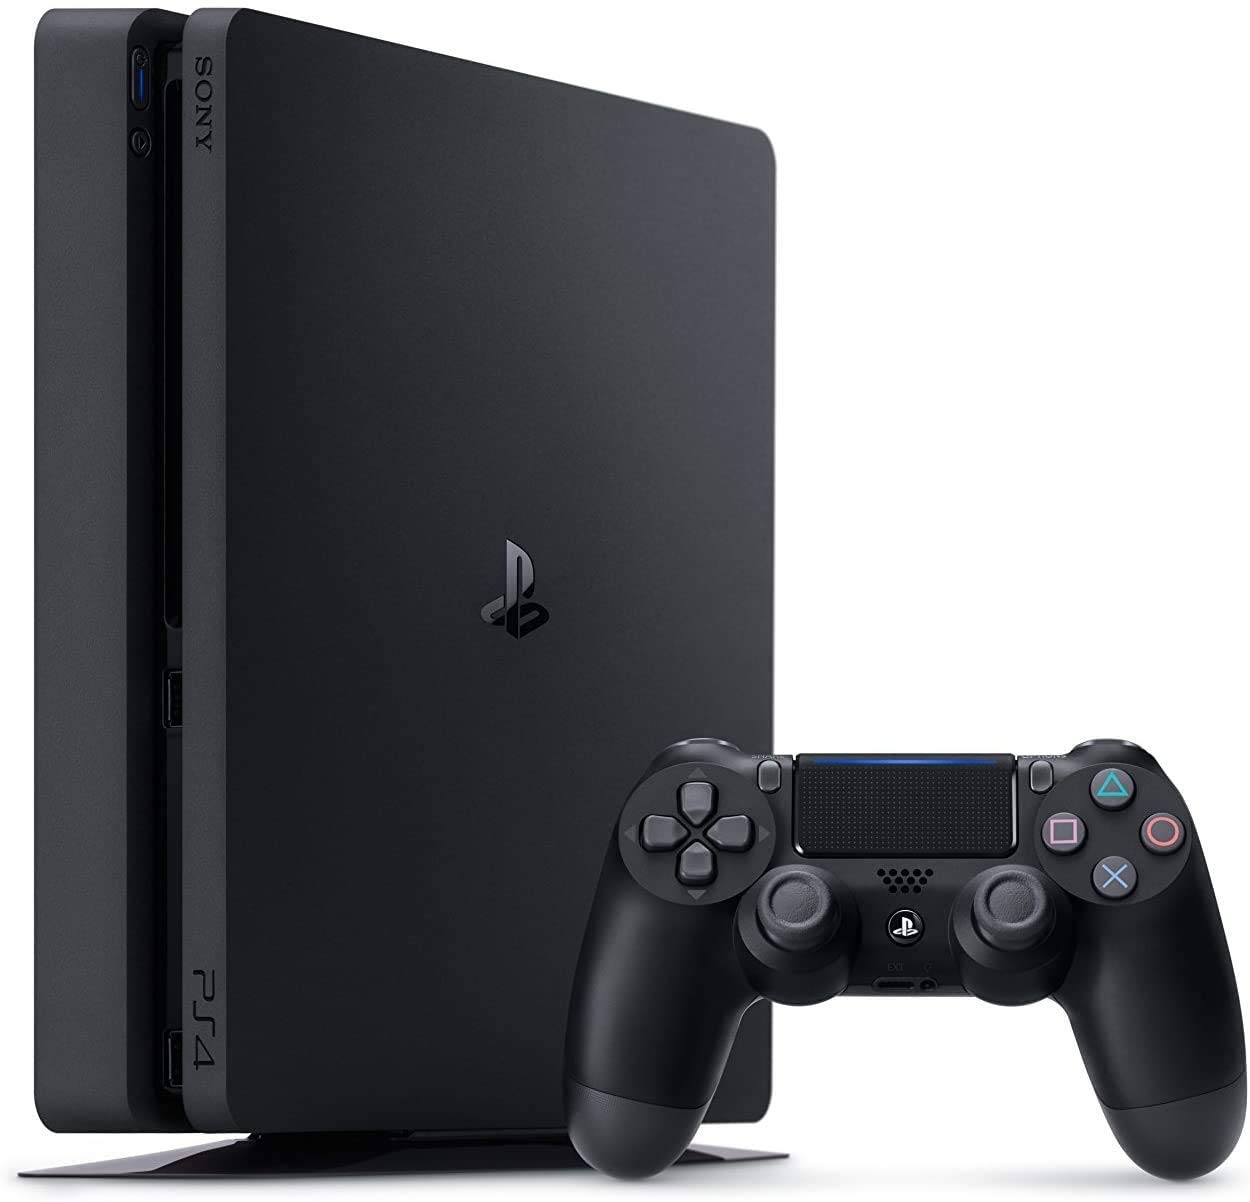 PS 4 Slim Seyted Upgraded 2TB Console with Wireless Controller, Jet Black